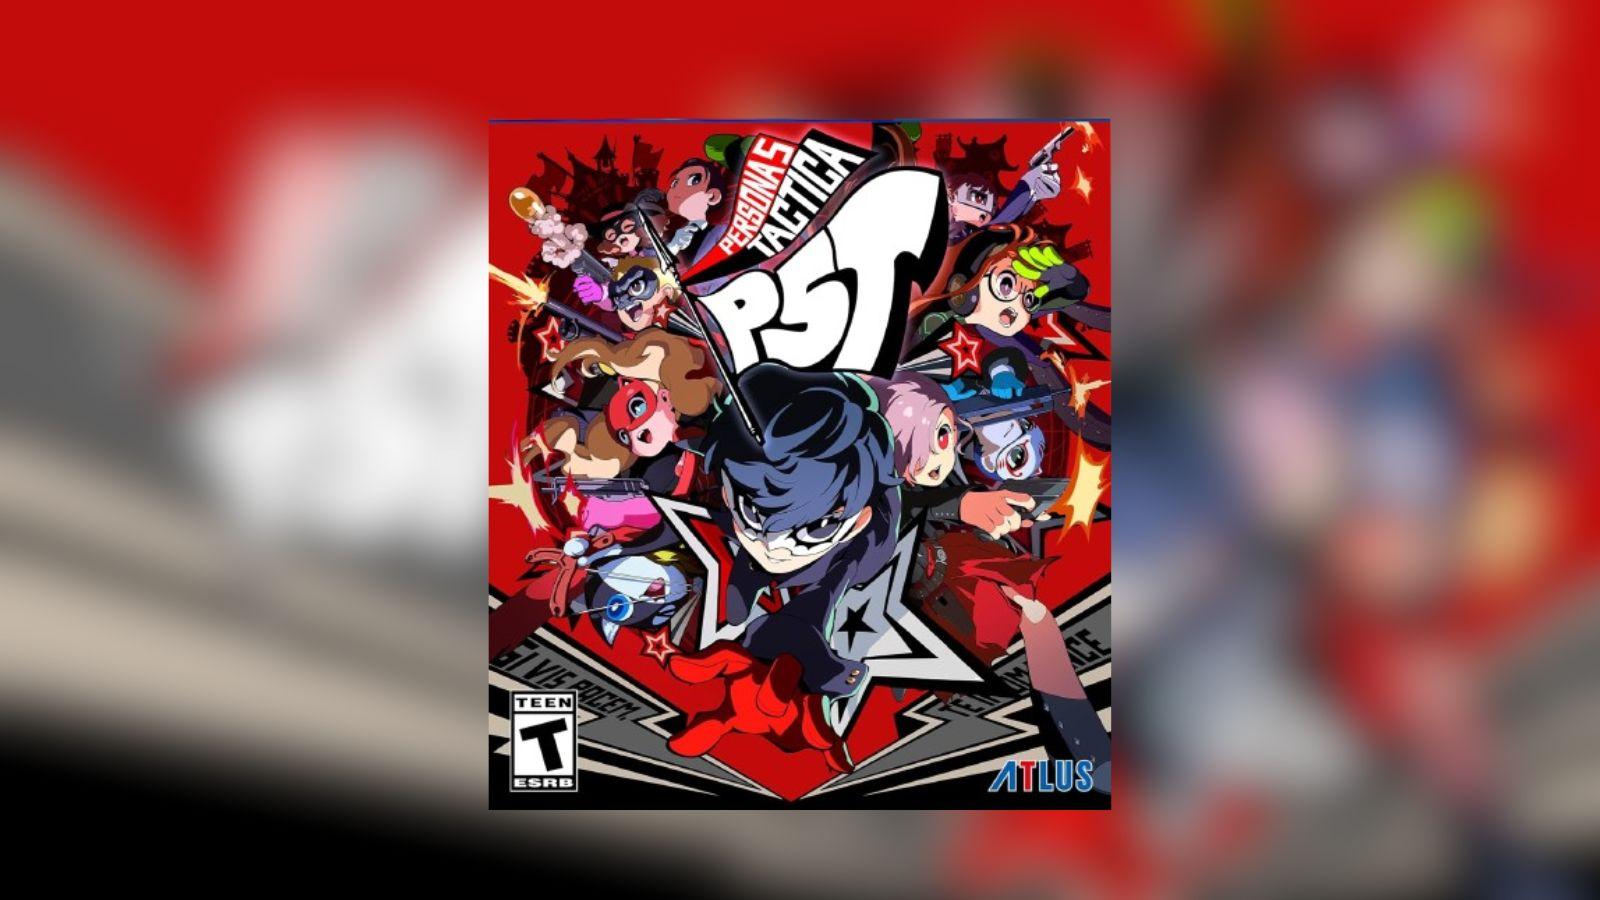 Persona 5 Tactica Release Date for PC and Consoles